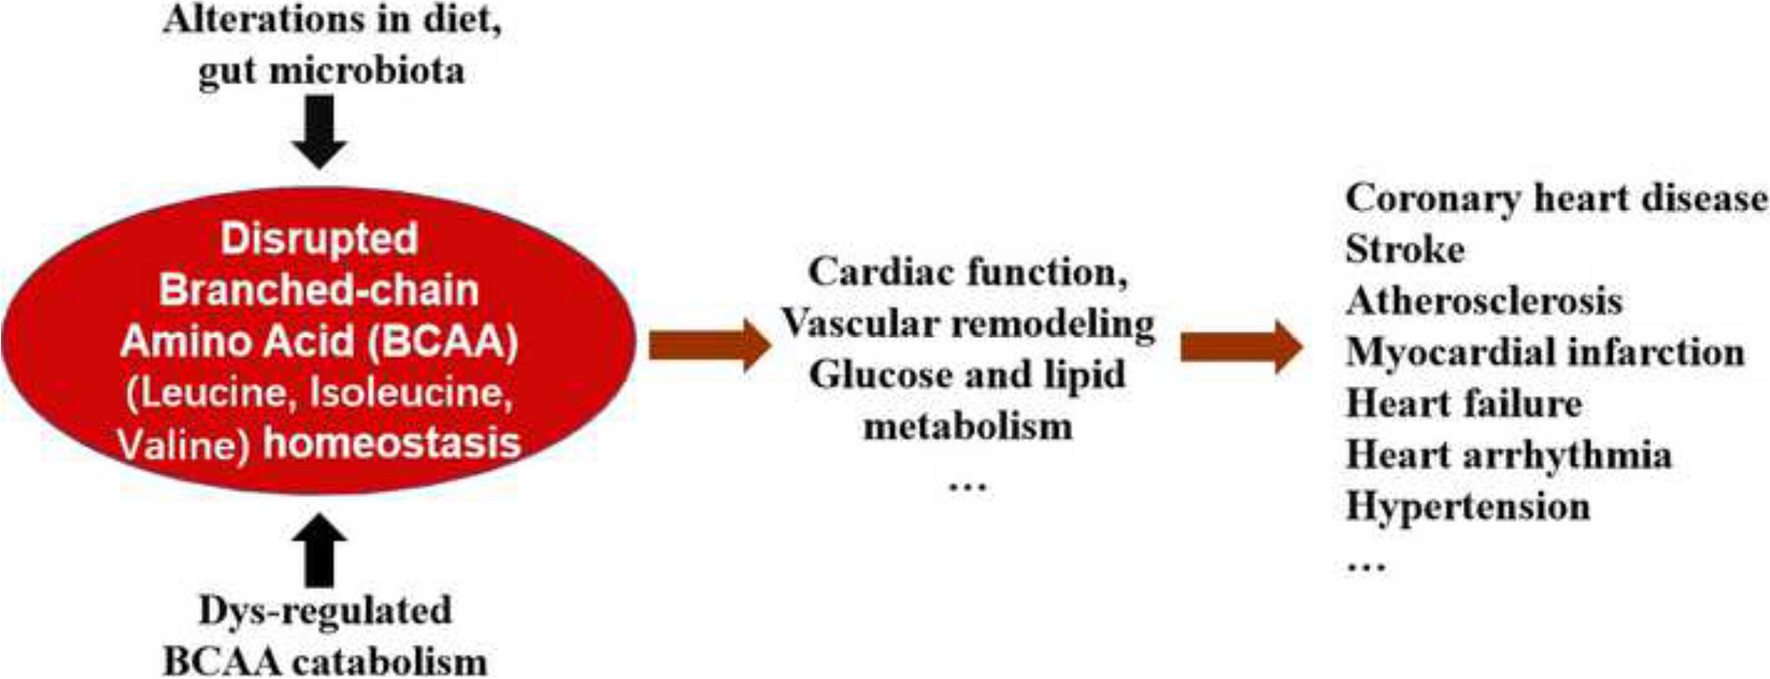 The Role of Branched-chain Amino Acids and Their Metabolism in Cardiovascular Diseases